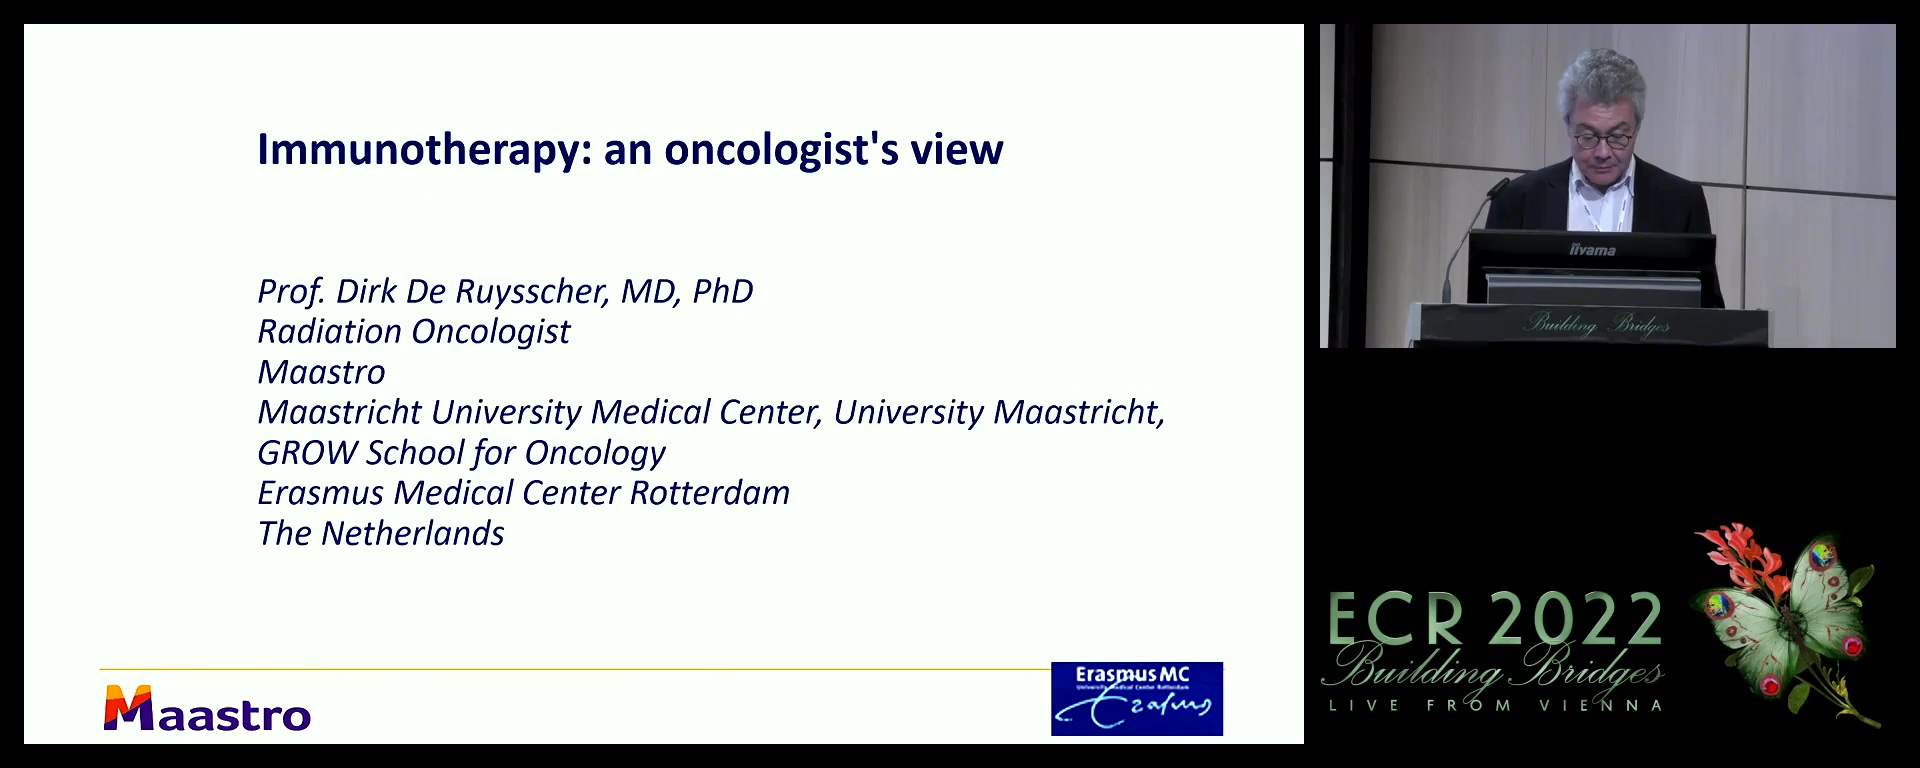 Immunotherapy: an oncologist's view